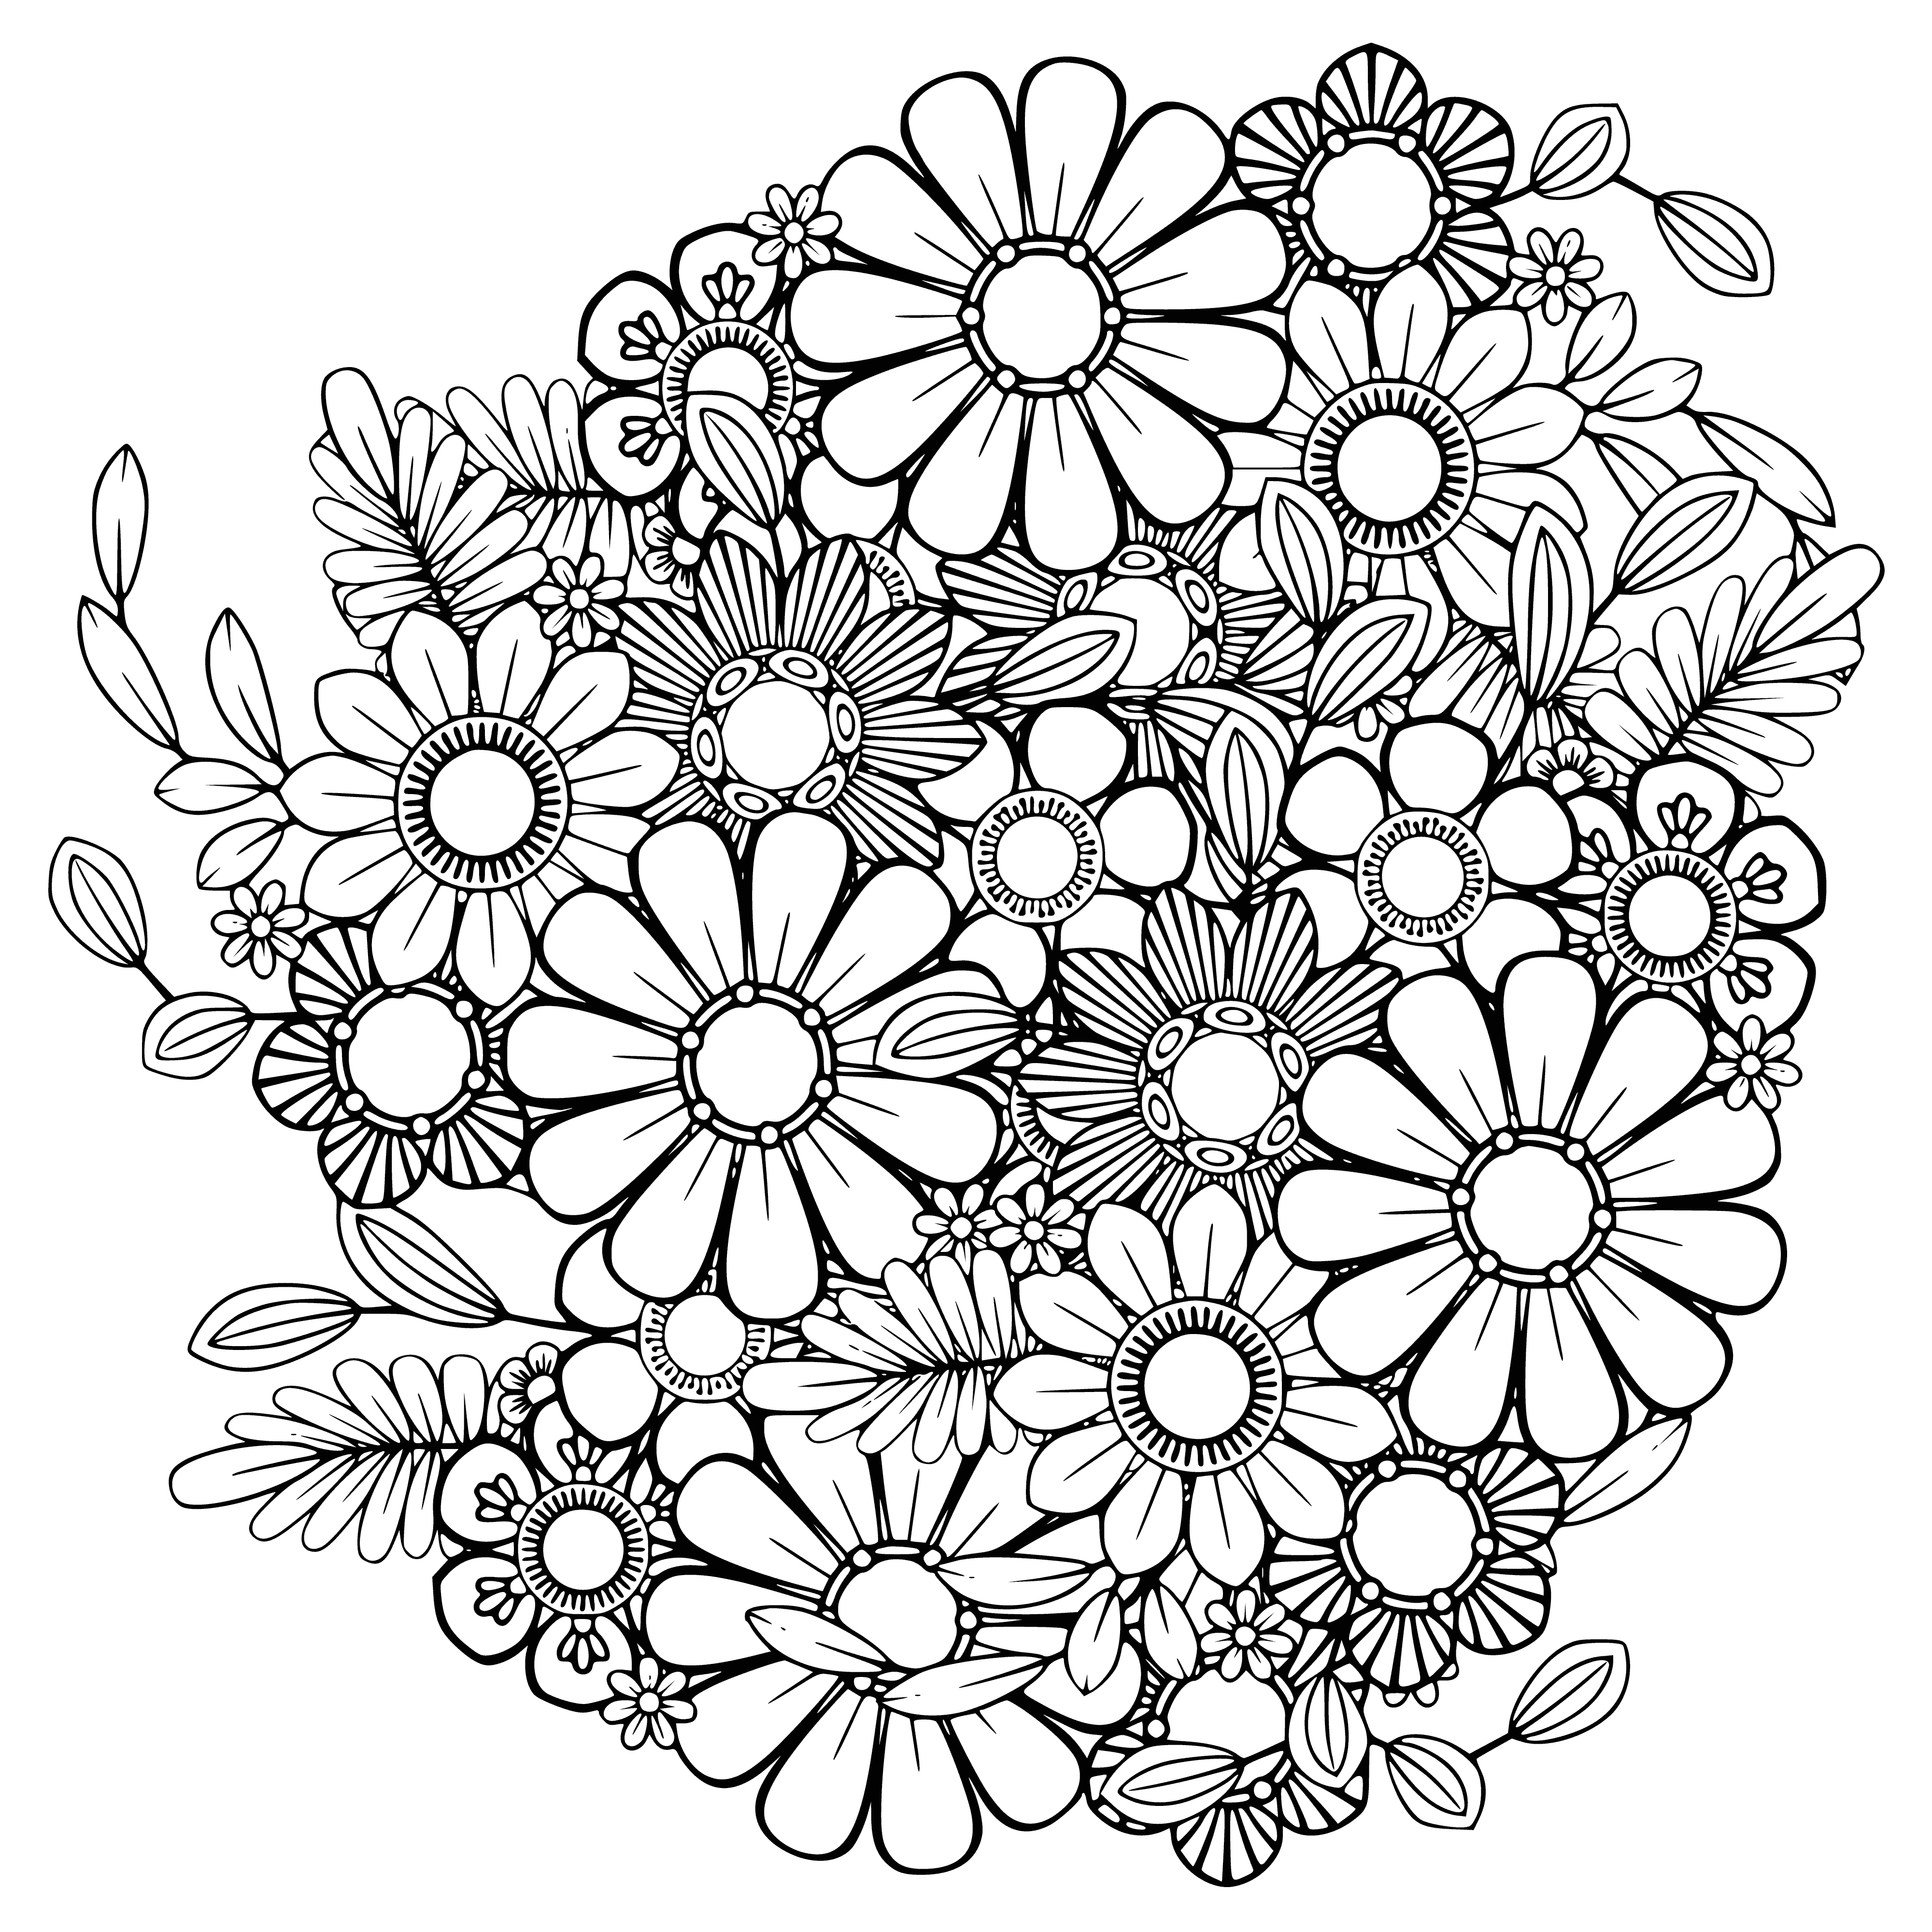 coloring page: A variety of flowers with leaves & no leaves, multi-colored & single colored, big & small.